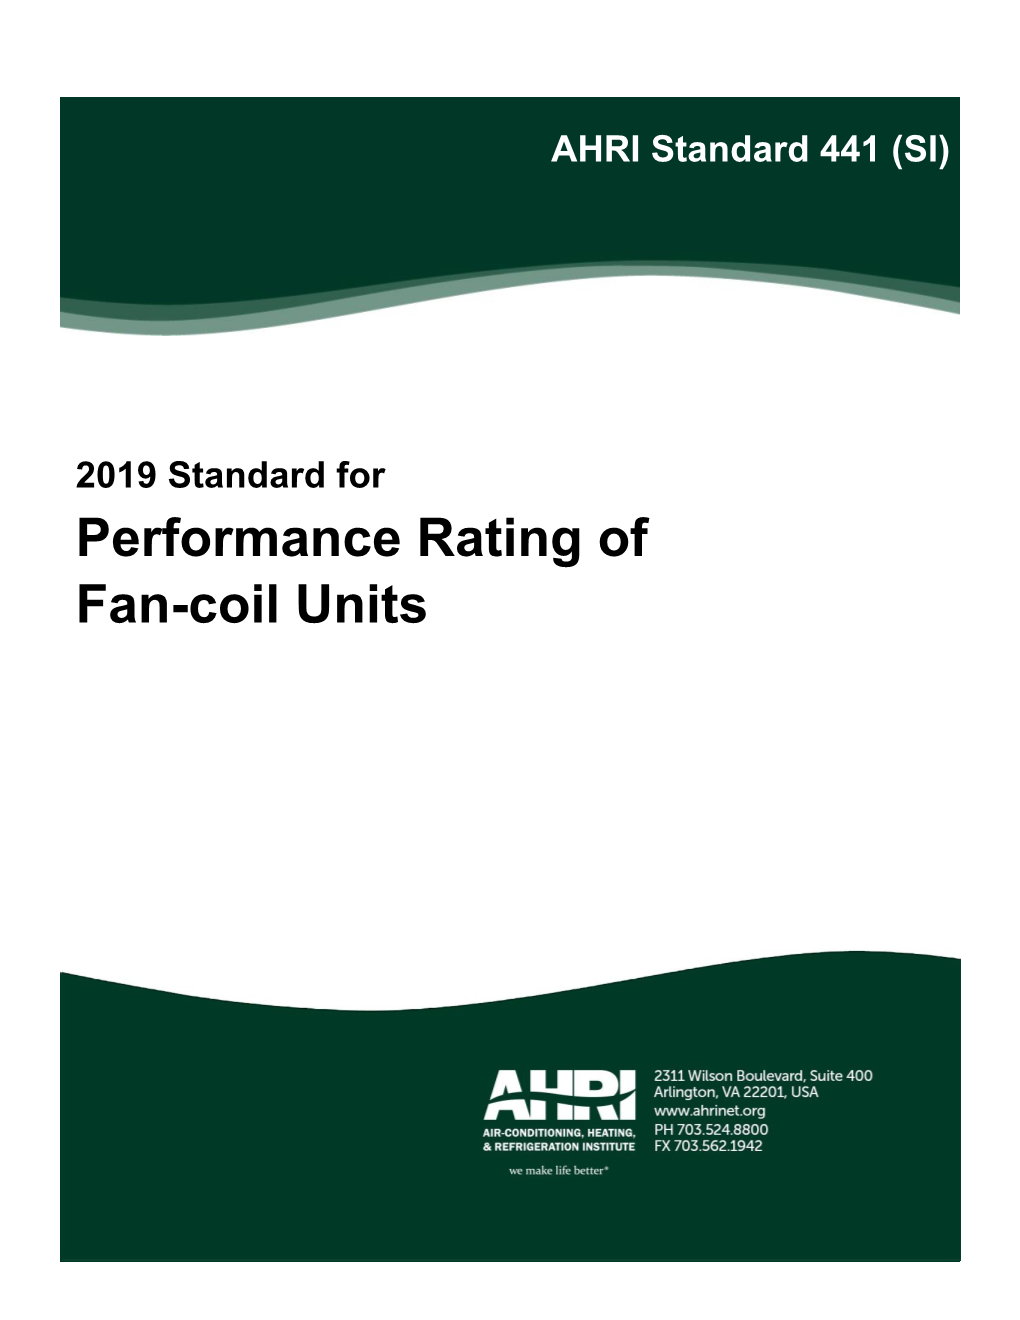 AHRI Standard 441 (SI/2019): Performance Rating of Fan-Coil Units